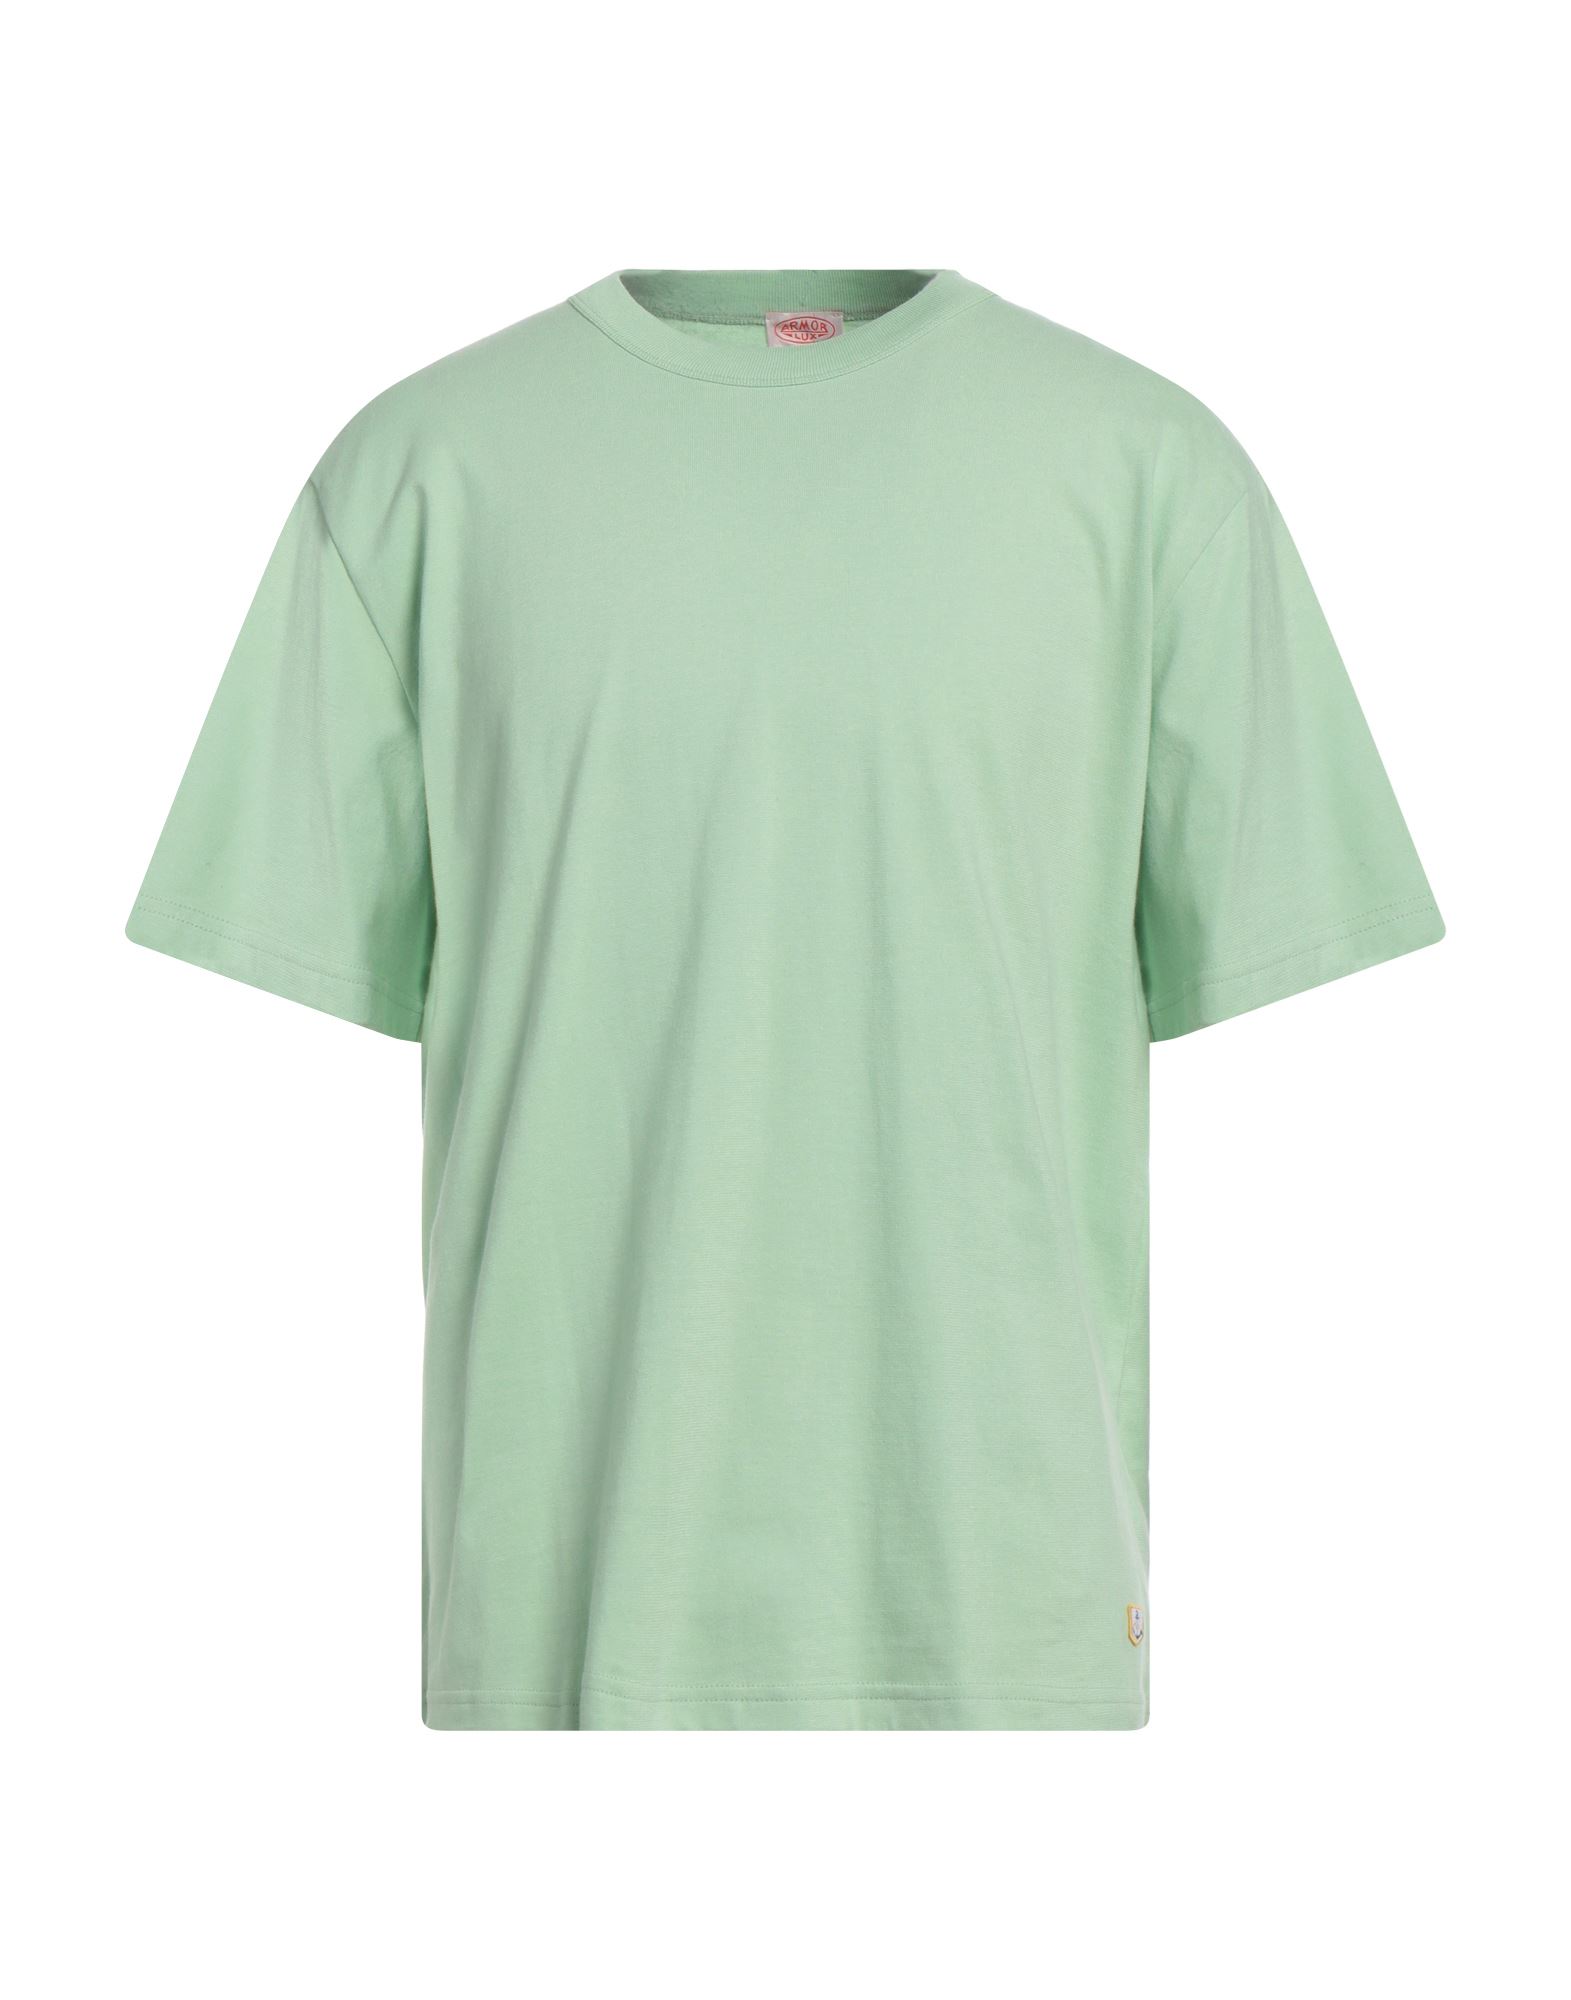 Armor-lux T-shirts In Light Green